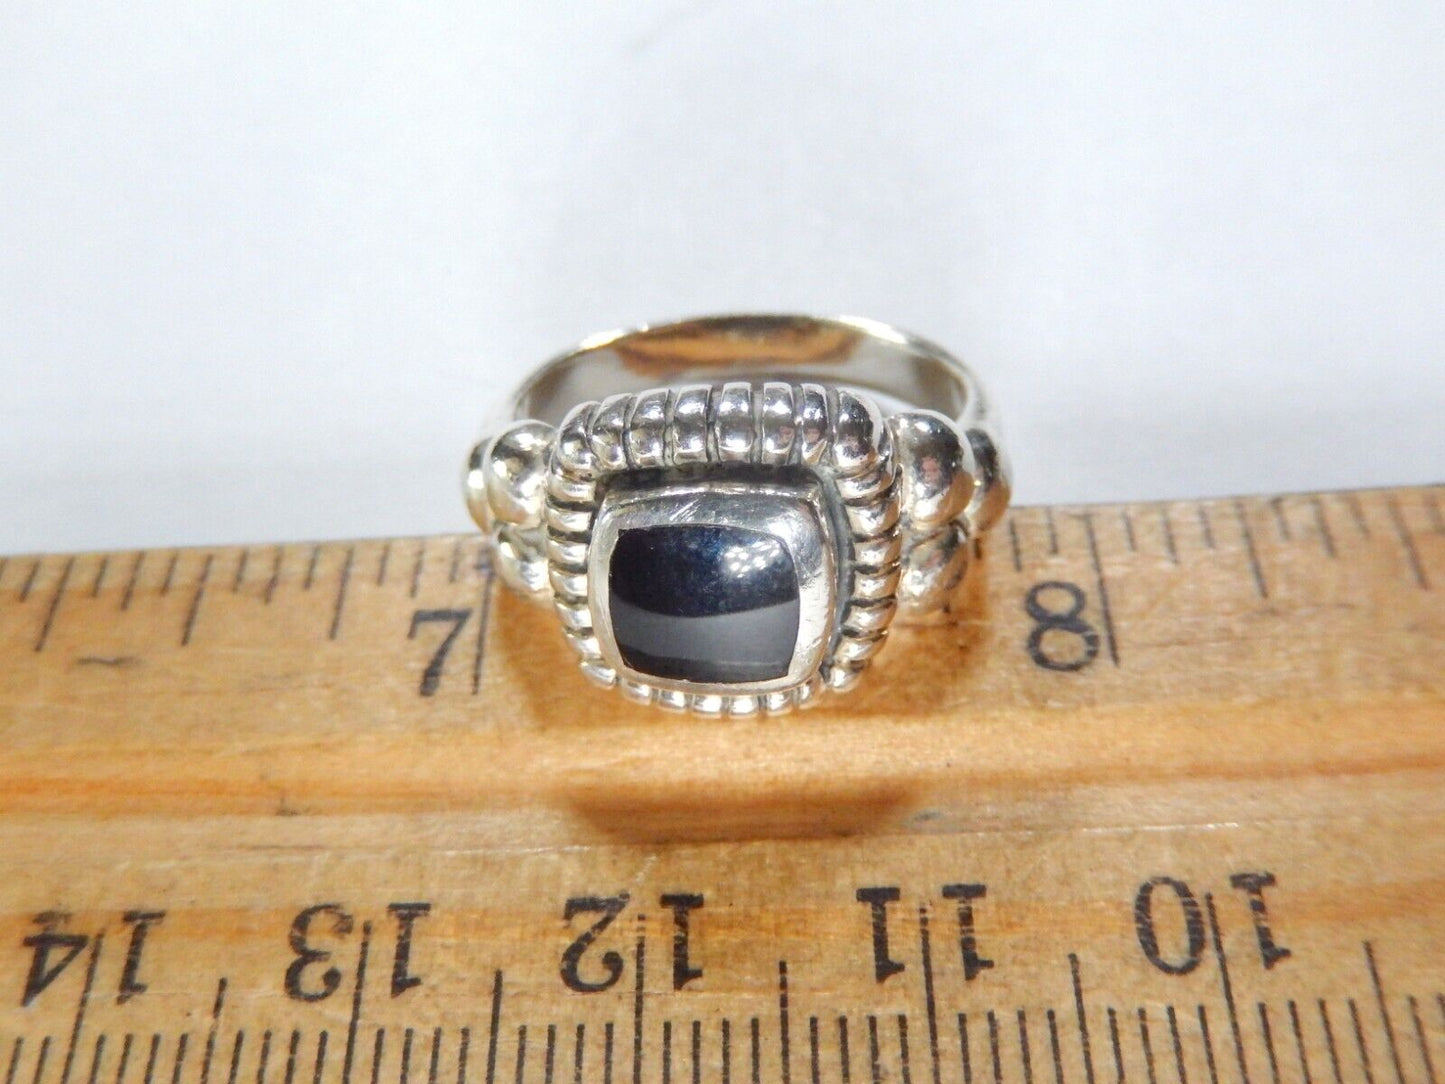 *VINTAGE* Black Onyx 925 Sterling Silver Boho Handcrafted Ring Size 8.75